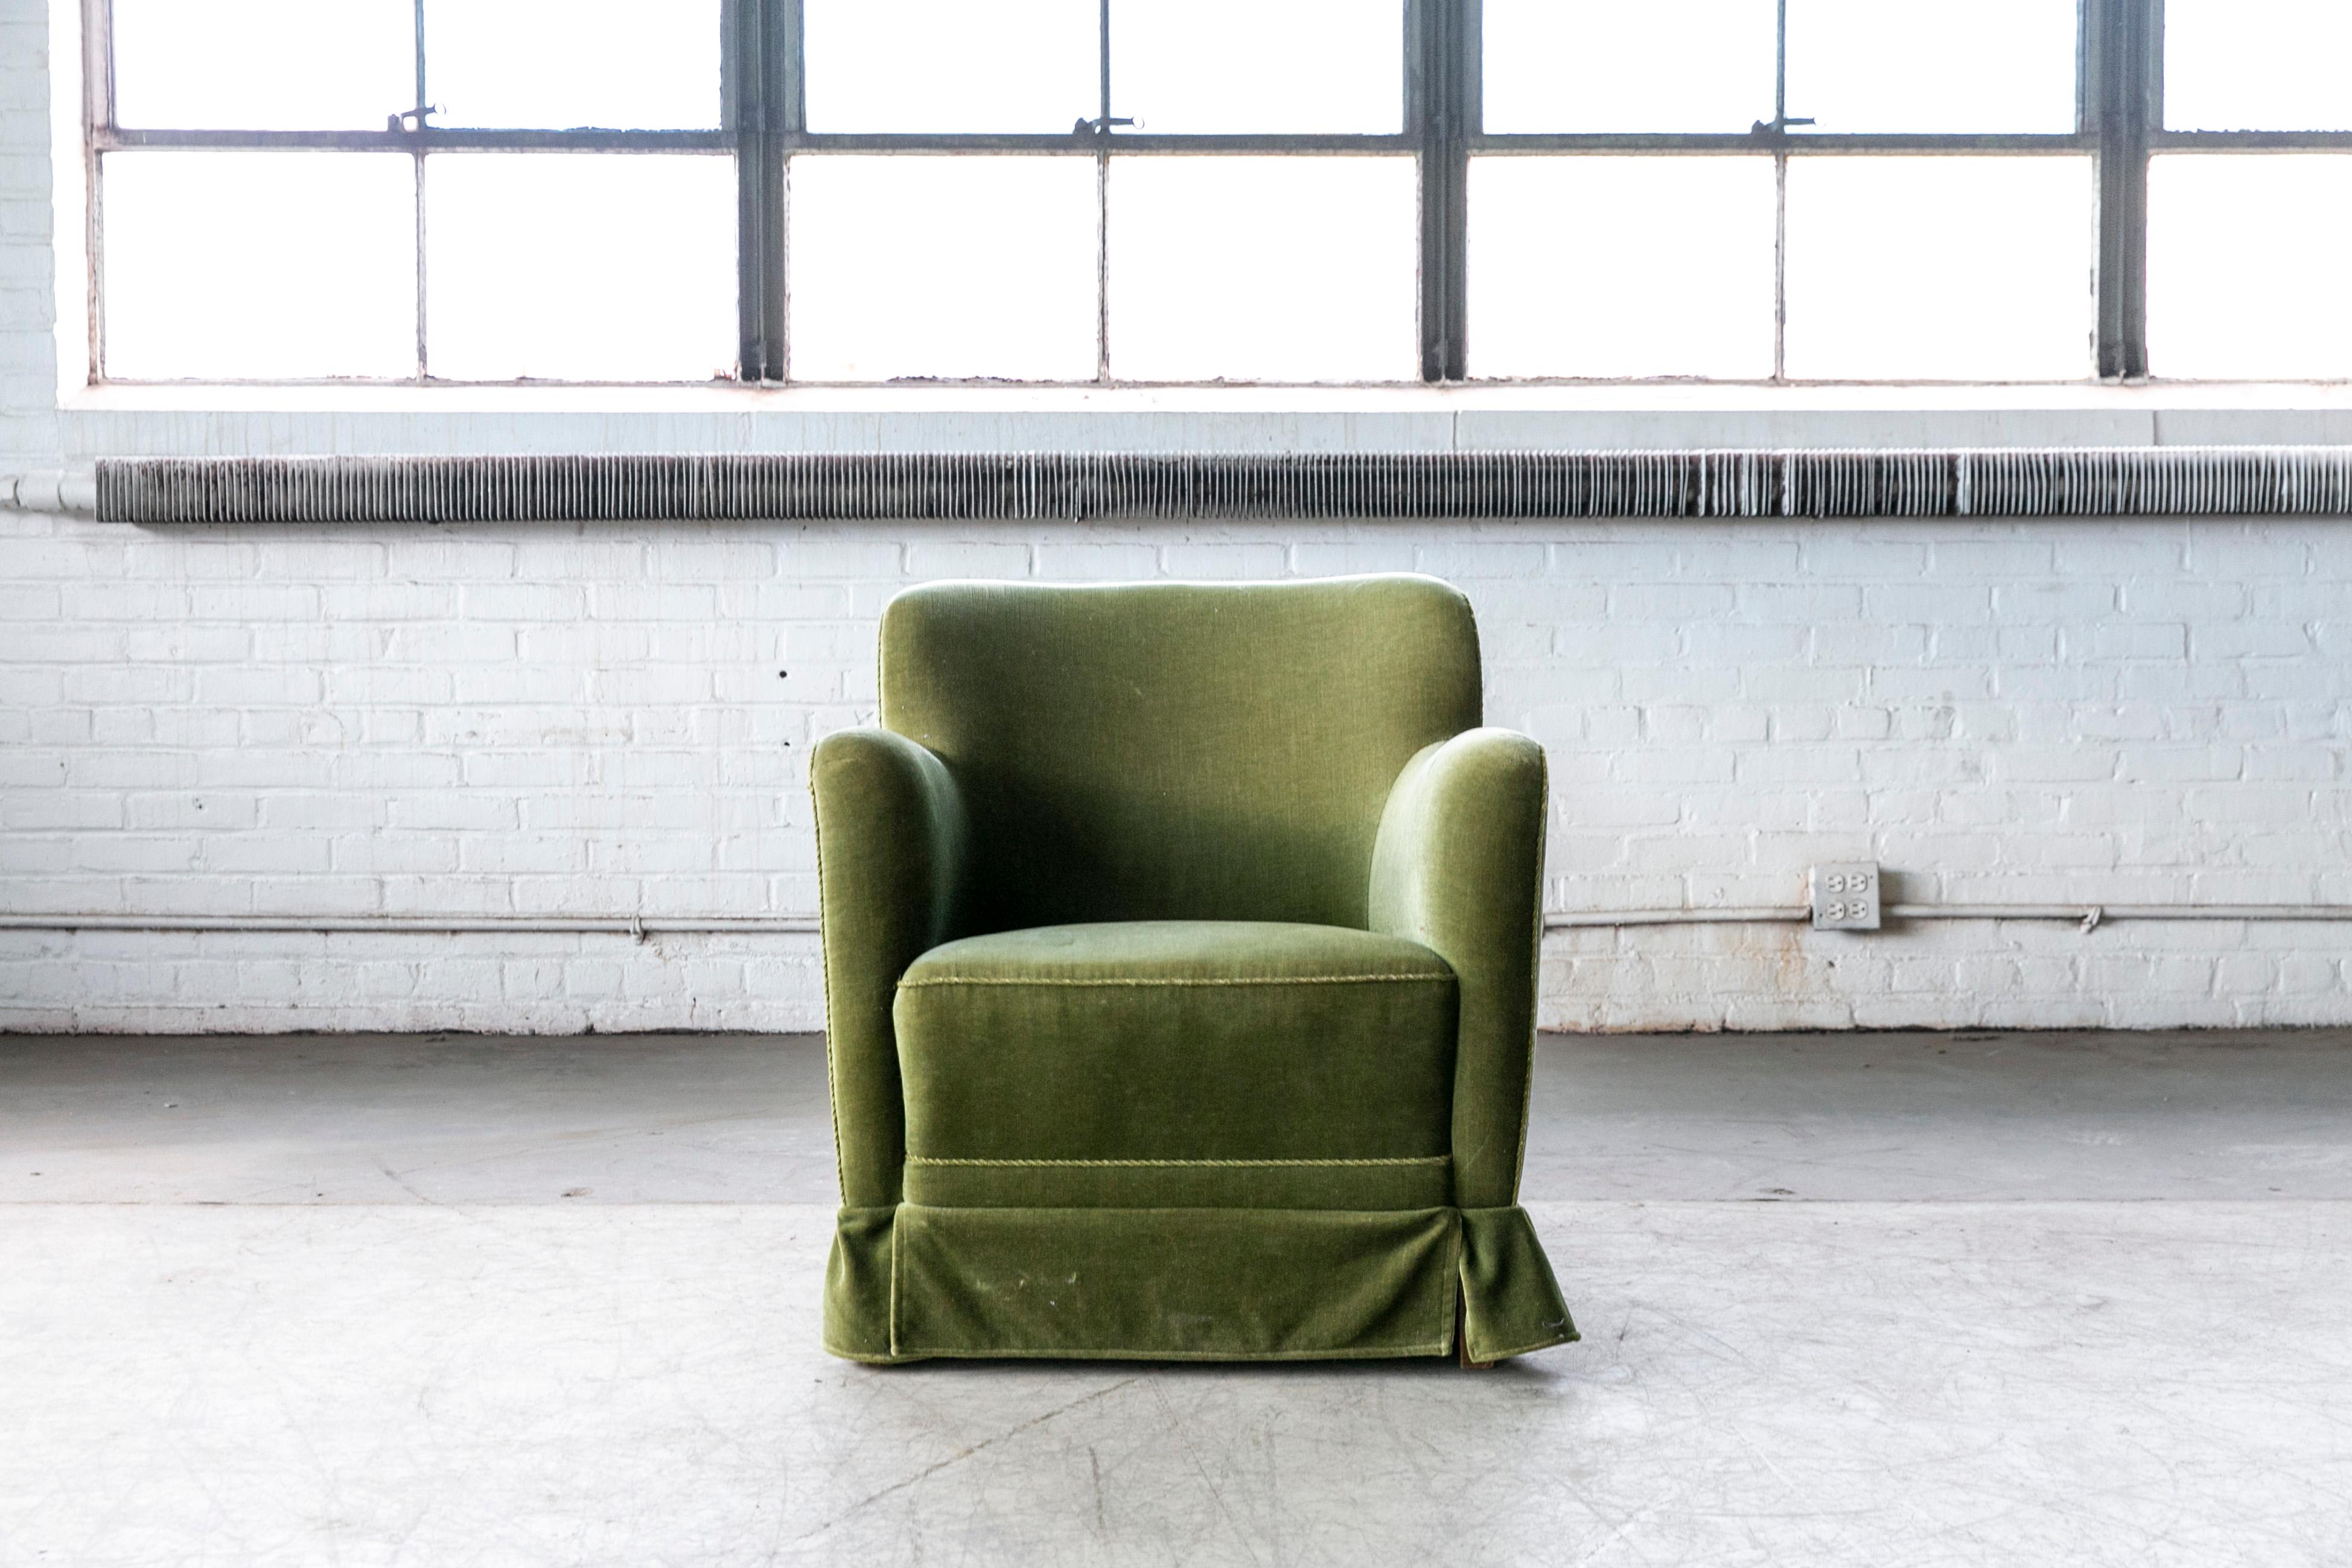 Mid-20th Century Danish Midcentury Lounge or Club Chair in Emerald Green Mohair, 1940s